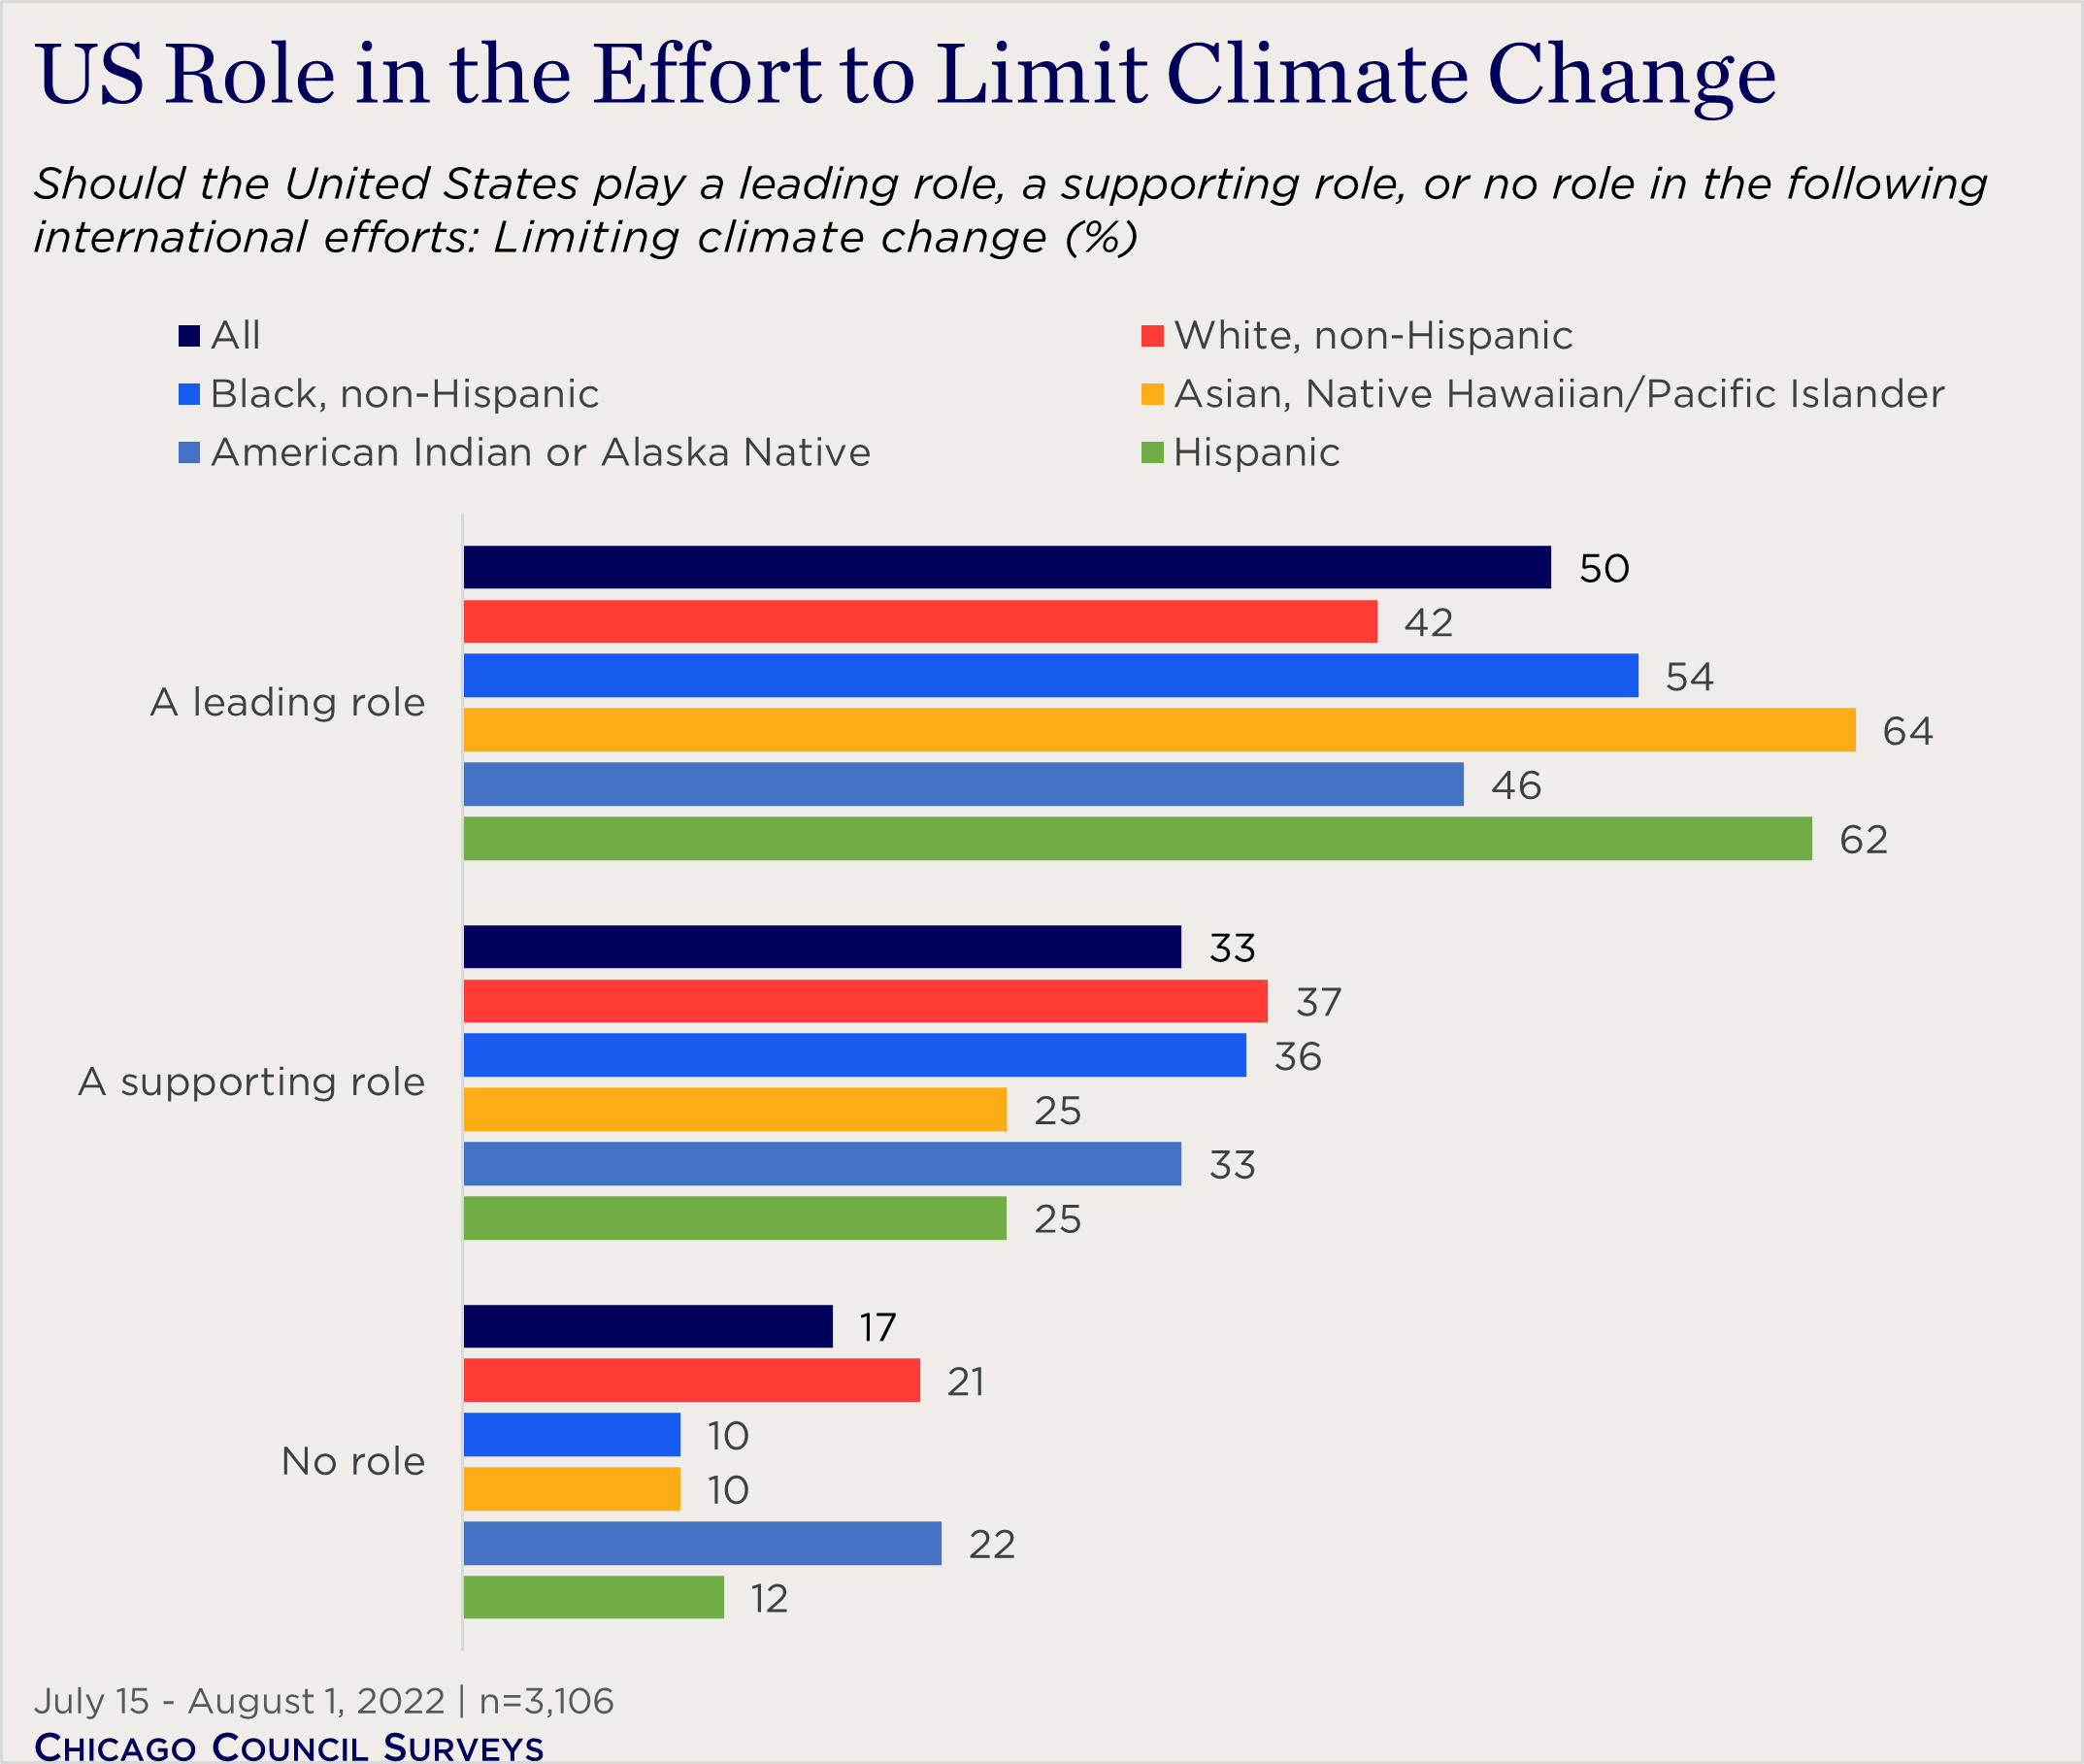 "bar chart showing views on US role in combatting climate change by race"